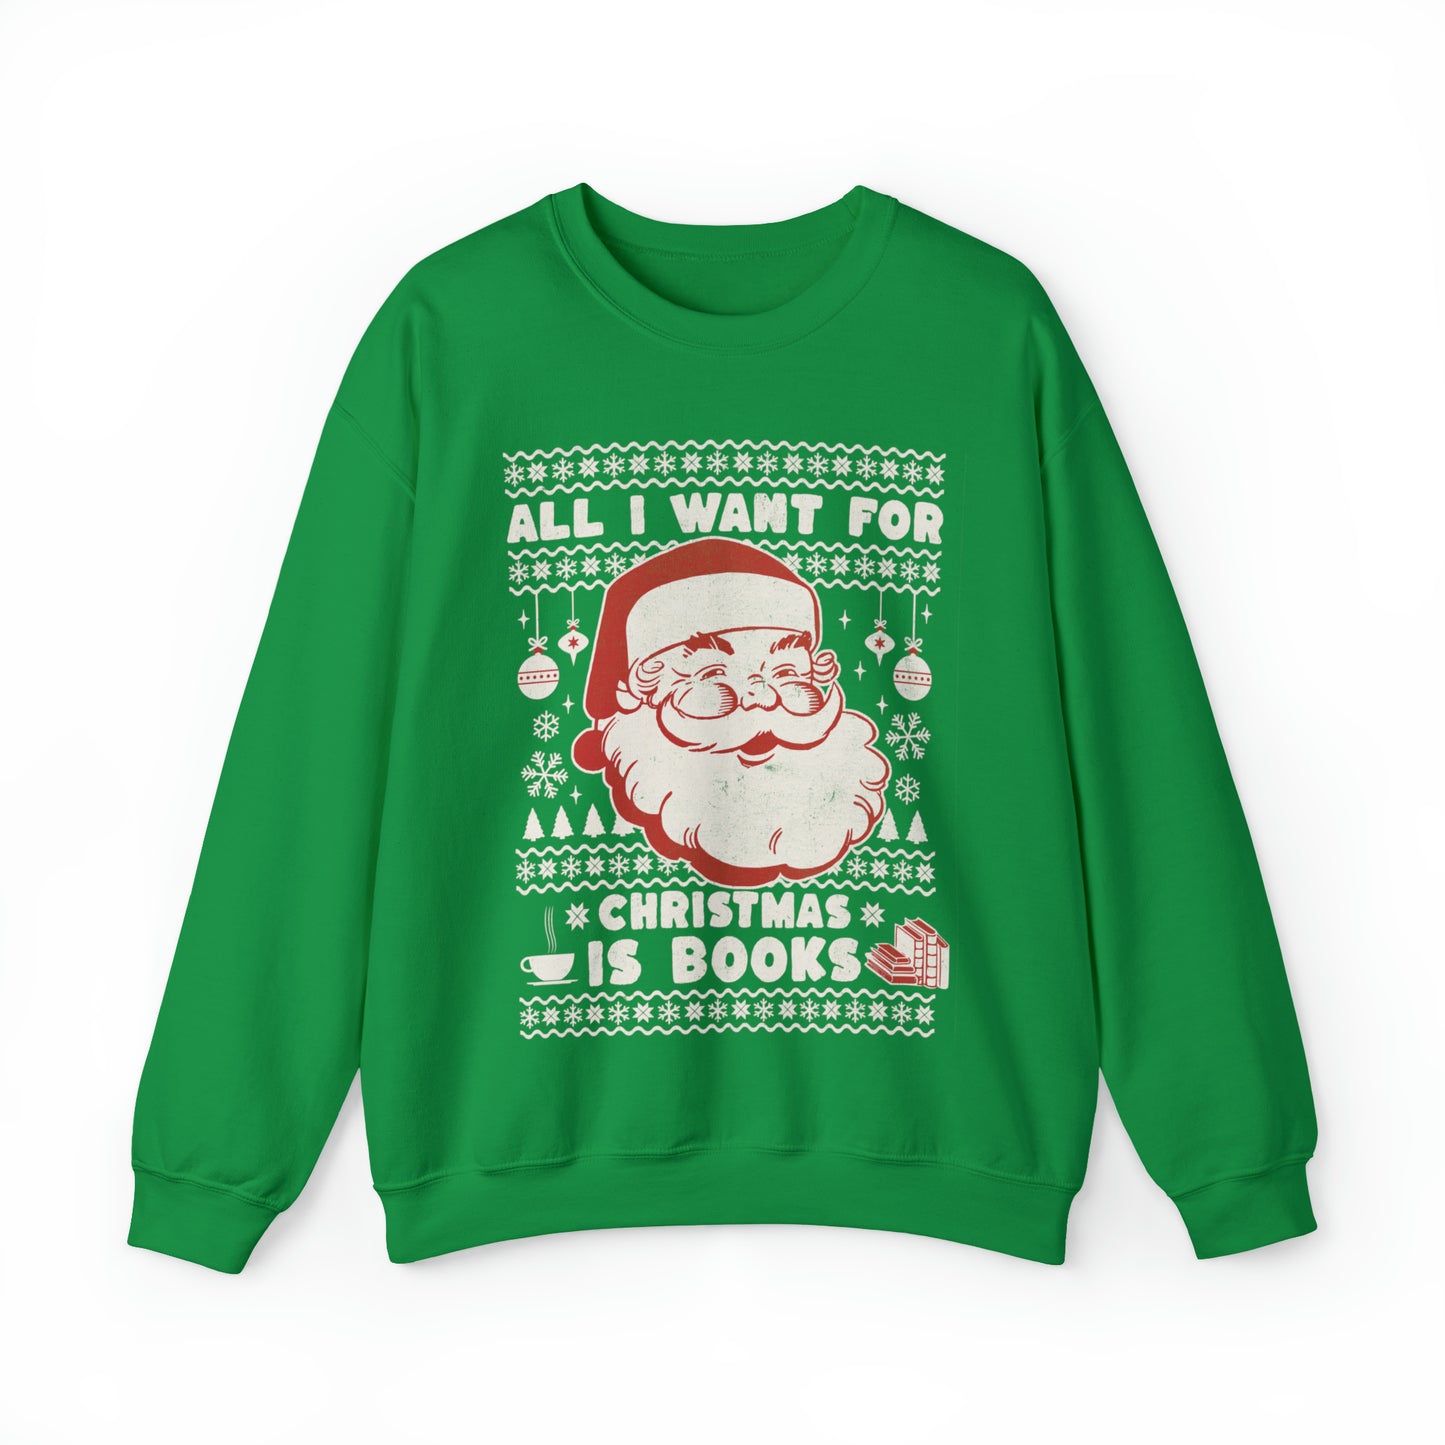 All I Want For Christmas is Books Unisex Sweatshirt - Ugly Christmas Sweater